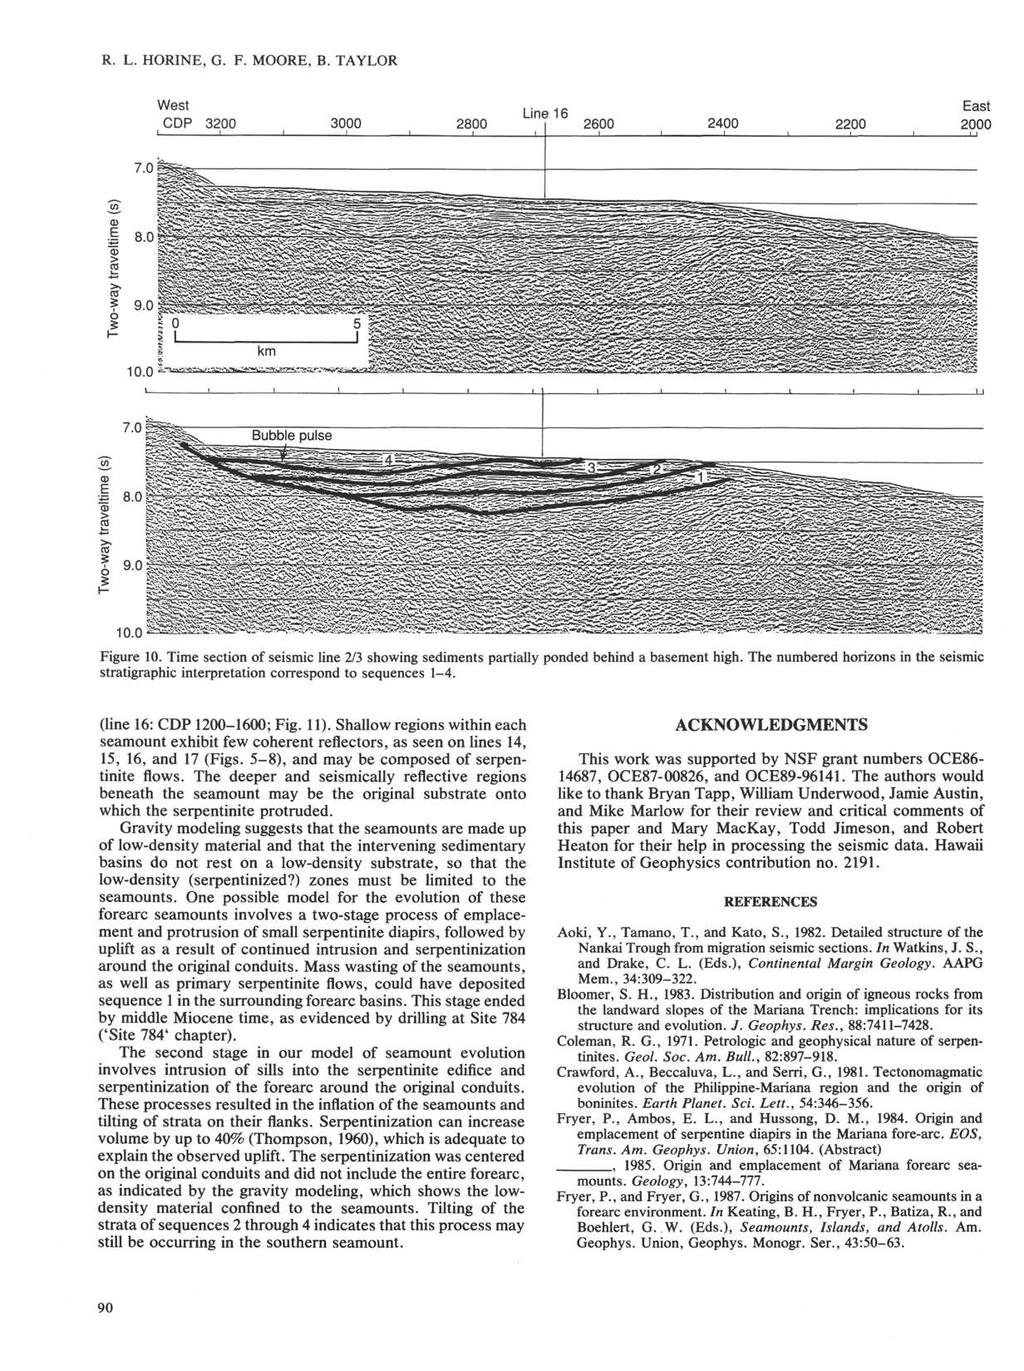 R. L. HORINE, G. F. MOORE, B. TAYLOR West CDP 3200 3000 Line 16 mmmm. 10.0 Figure 10. Time section of seismic line 2/3 showing sediments partially ponded behind a basement high.